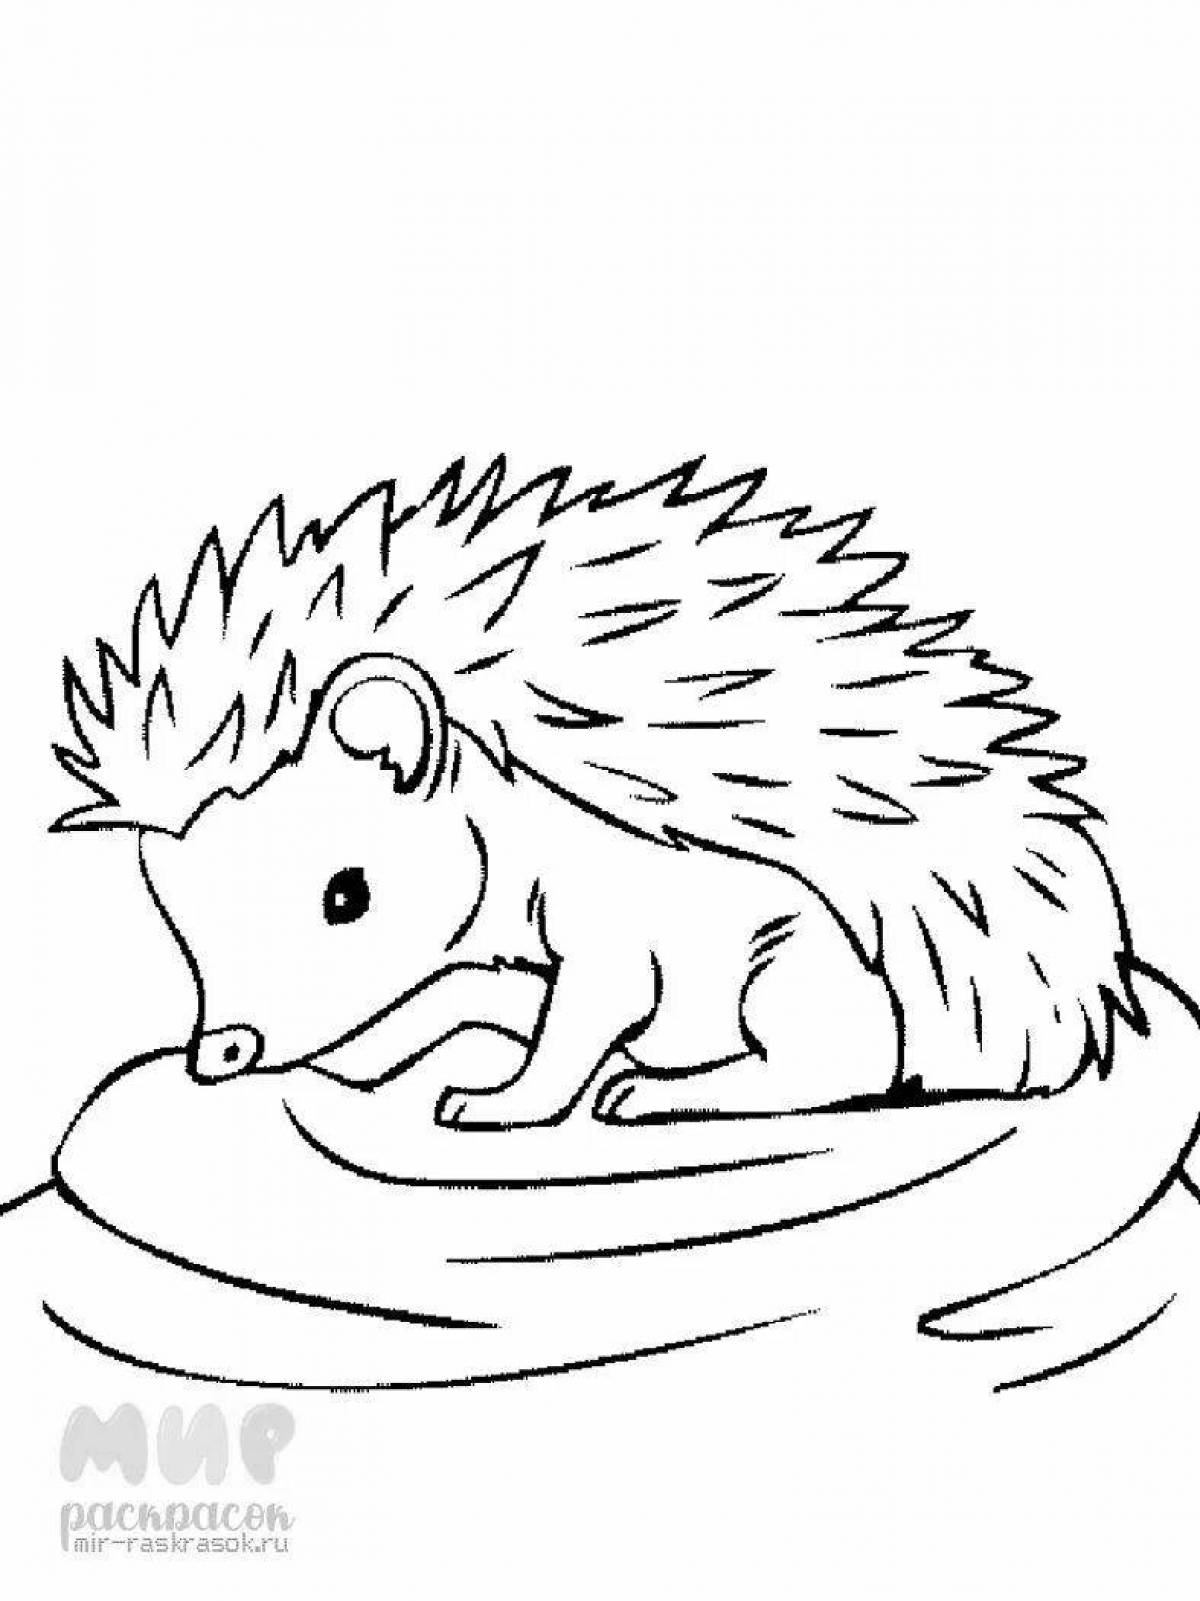 Colorful drawing of a hedgehog